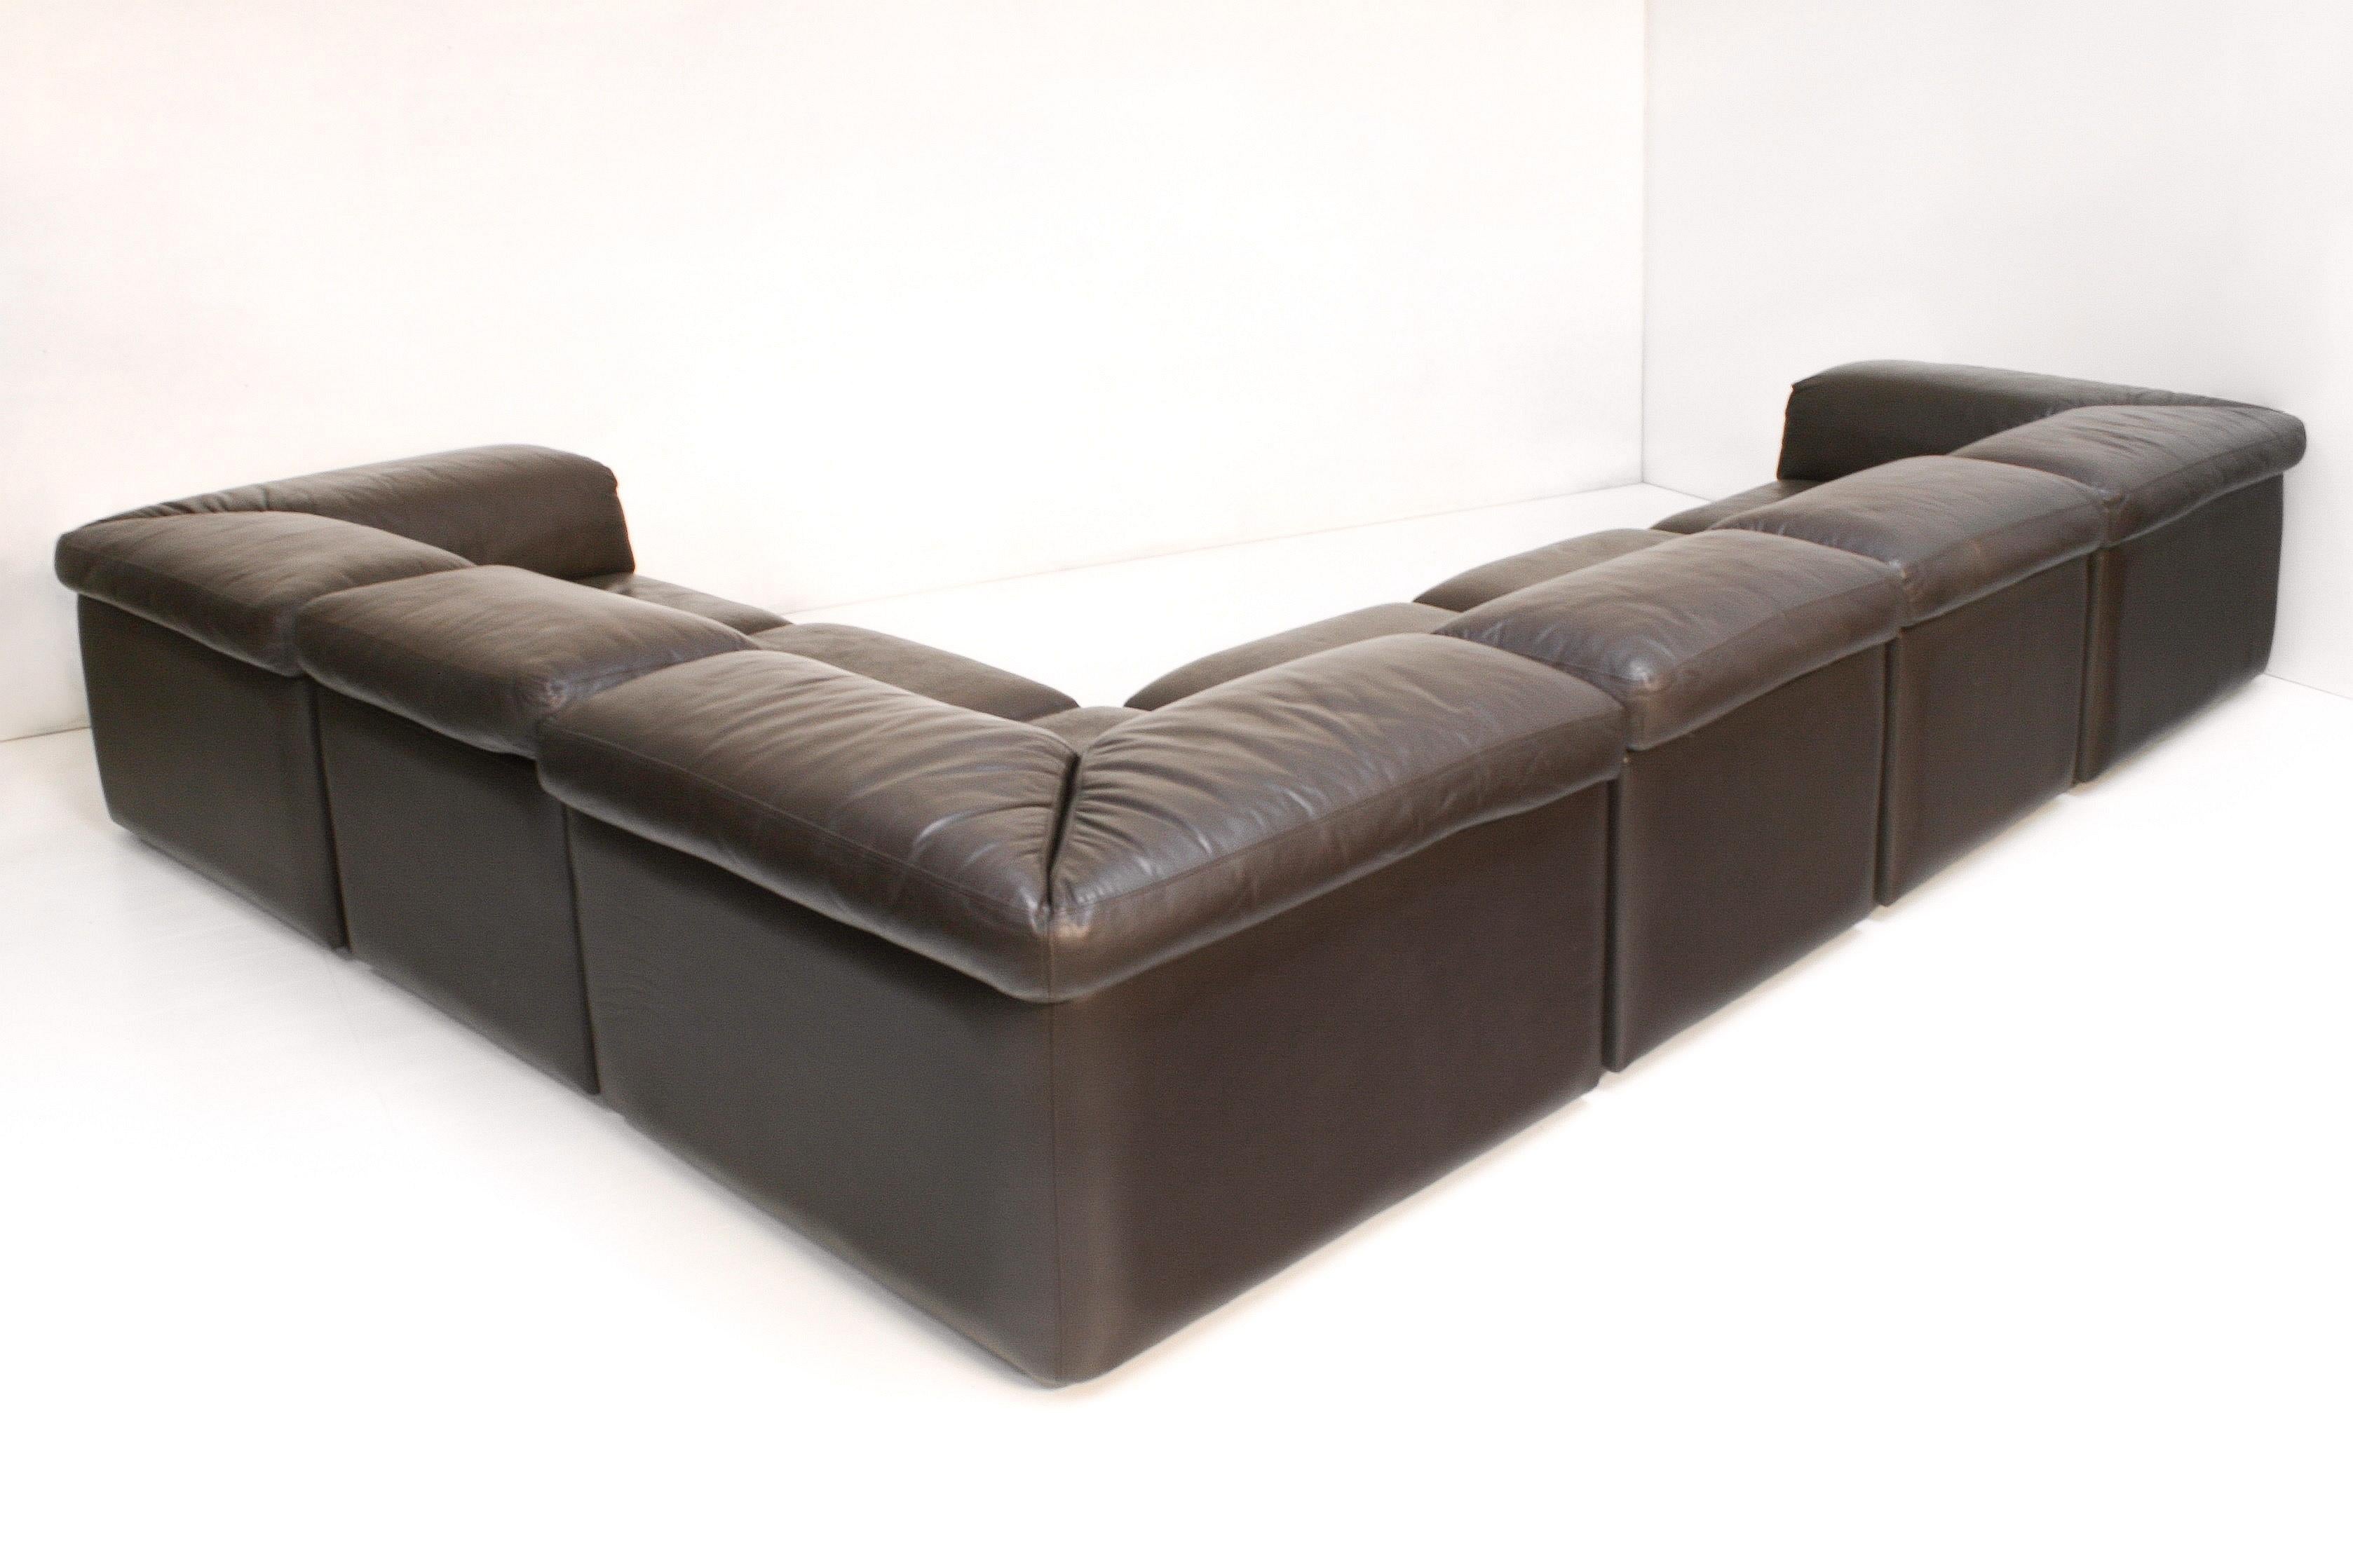 Modular Brown Leather Jeep Sectional Sofa by Anita Schmidt for Durlet, 1970s For Sale 6